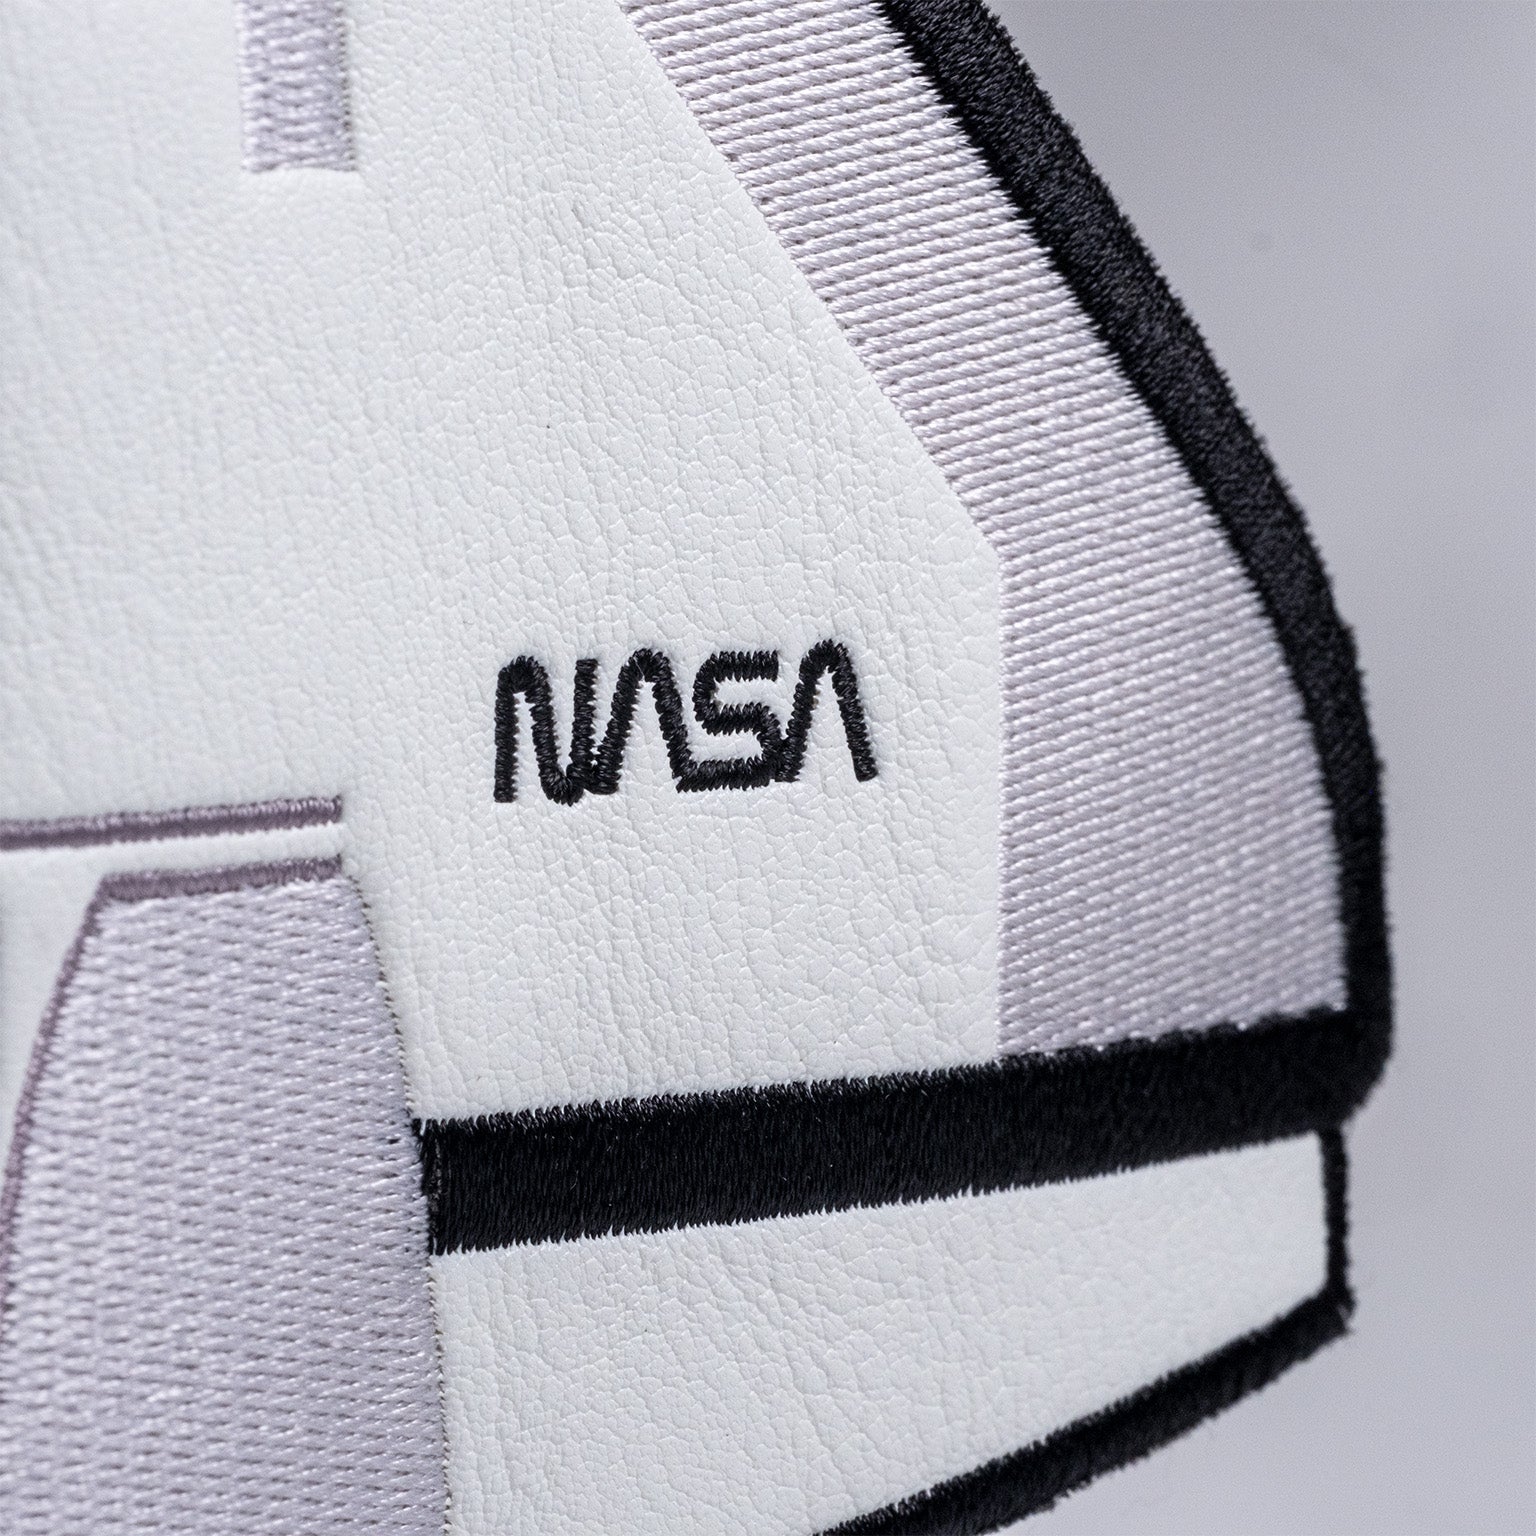 NASA Space Shuttle - Driver Cover